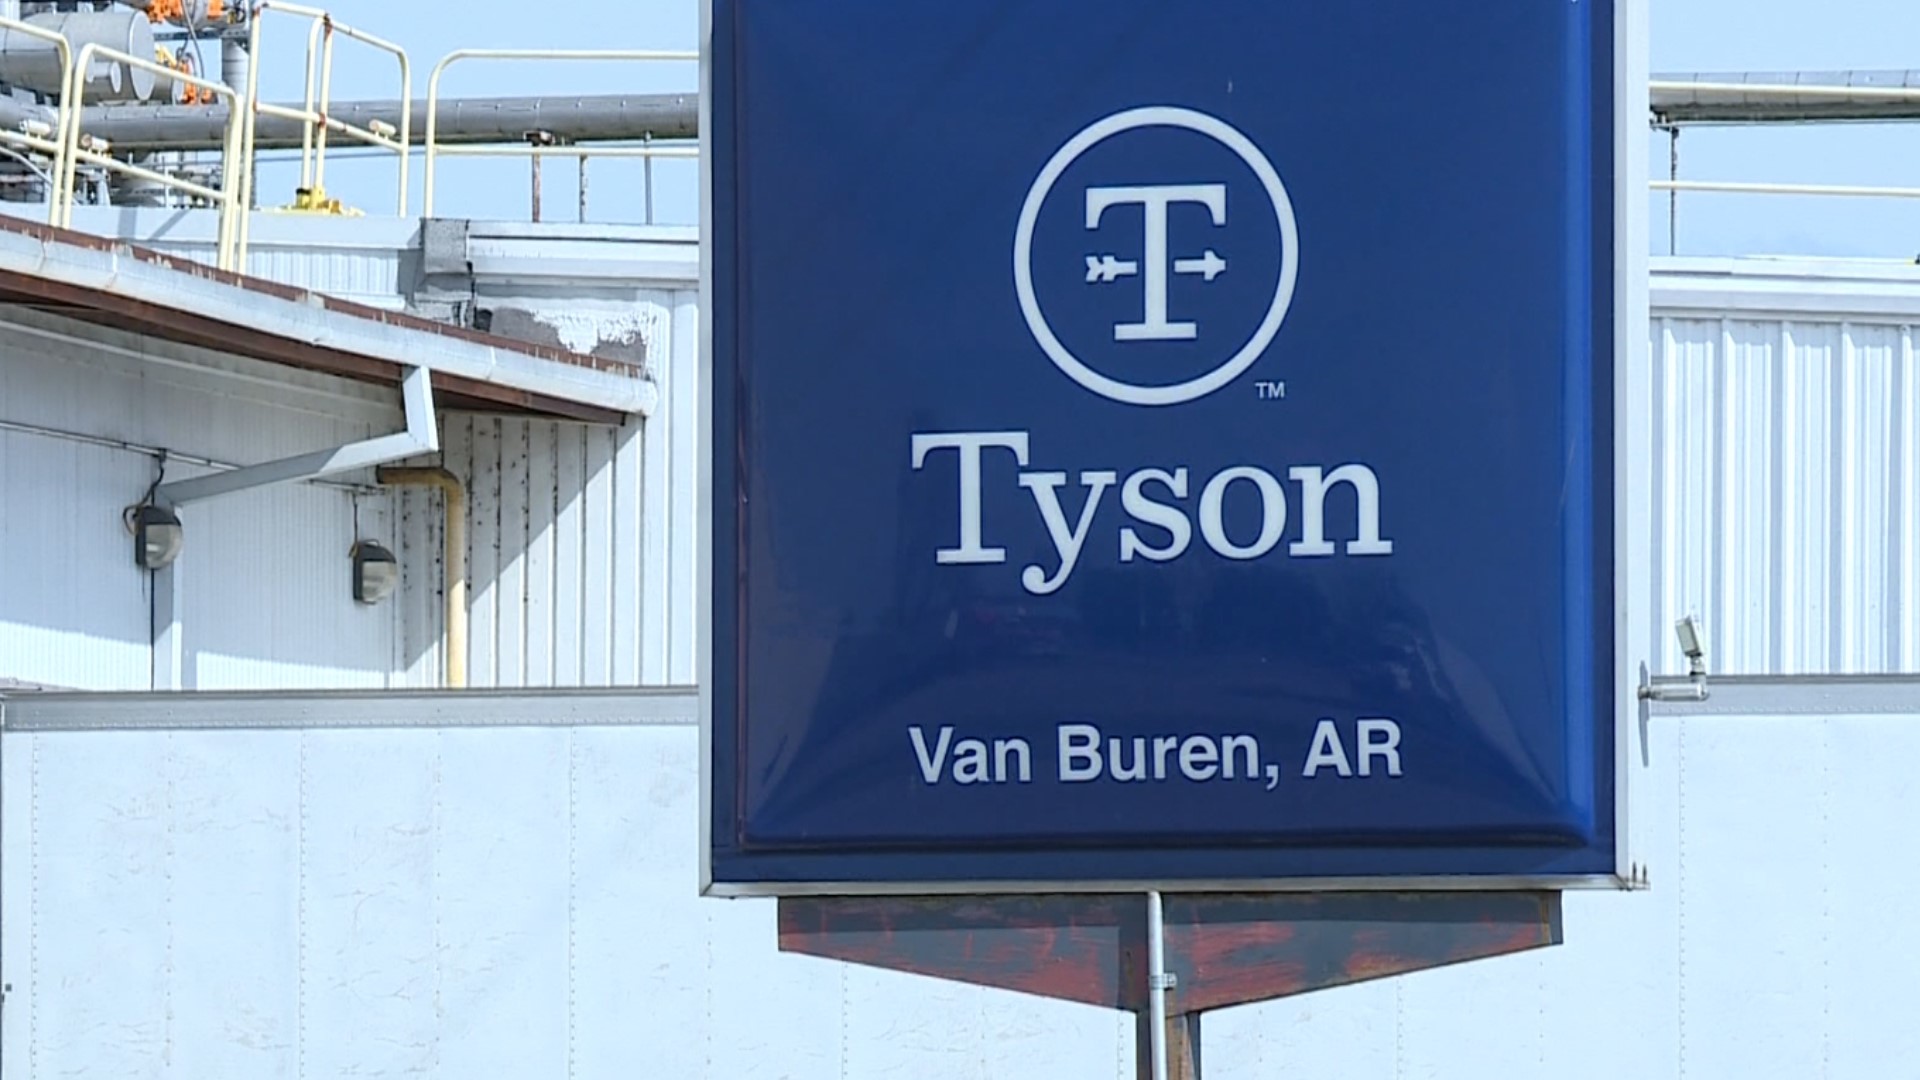 It's not clear if Tyson Corporate made the decision to not operate the plant on its final day or if employees are not showing up tomorrow in protest.